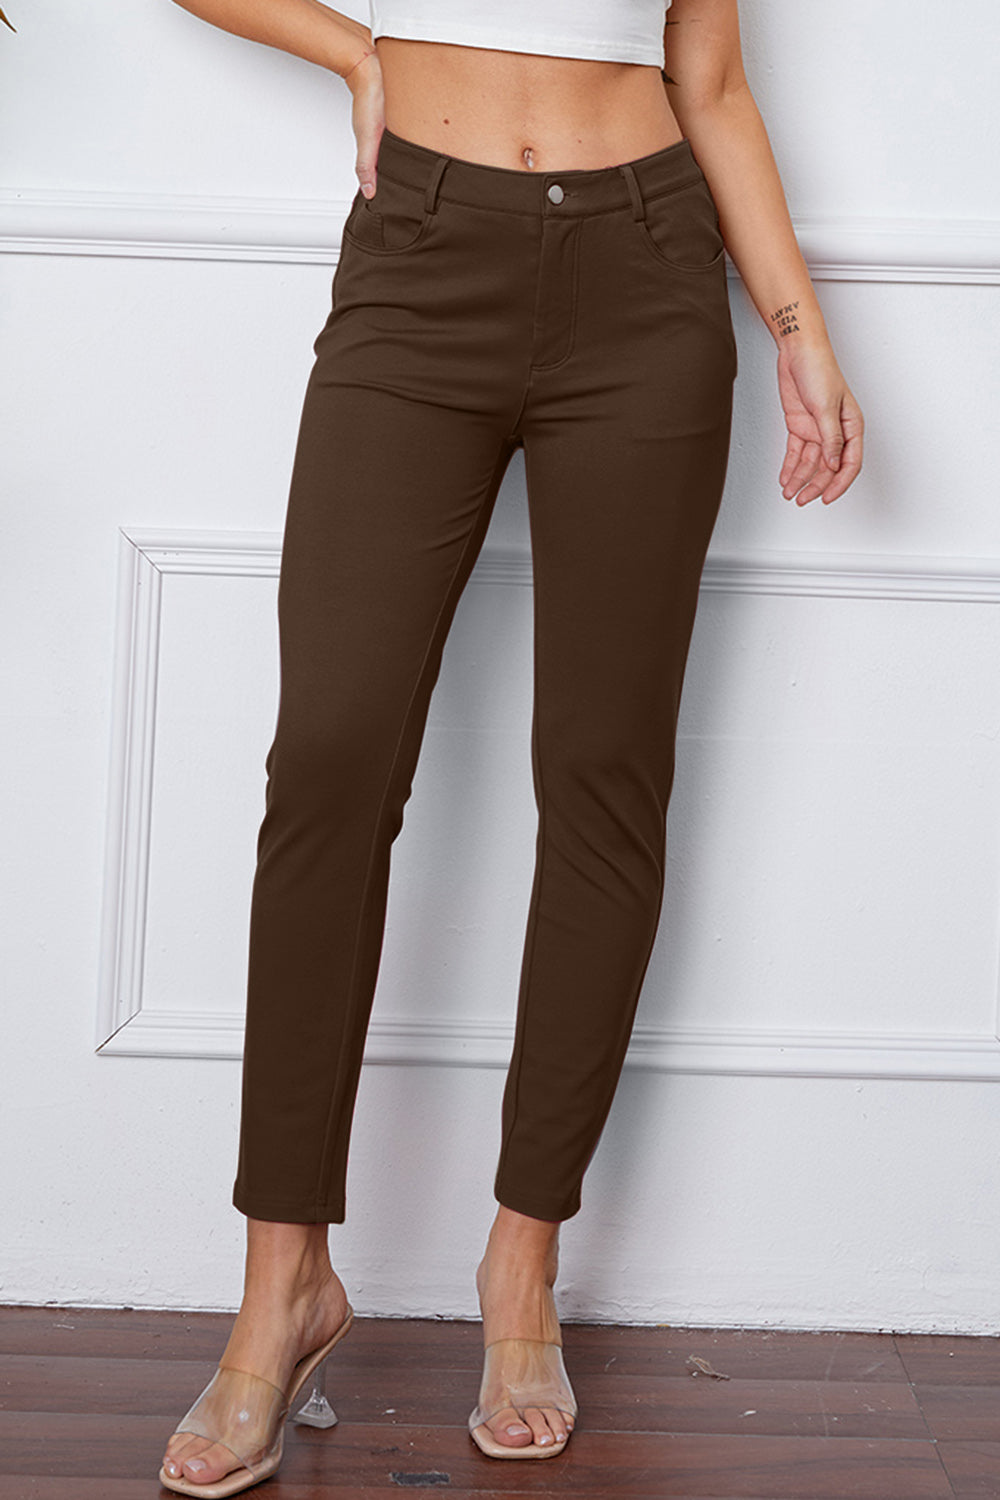 StretchyStitch Pants by Basic Bae free shipping -Oh Em Gee Boutique